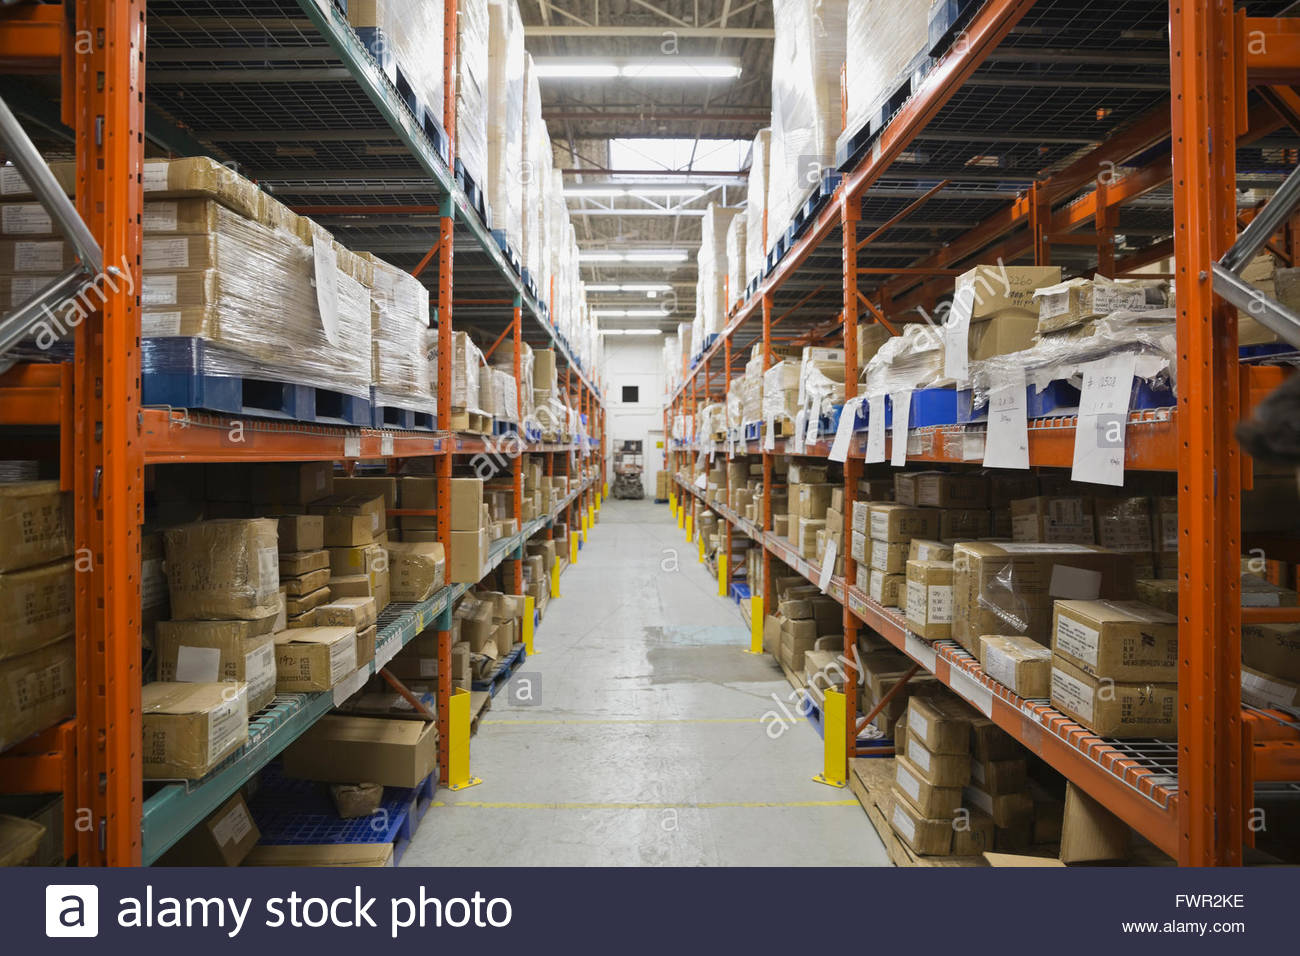 Warehouse aisle with shelving and boxes Stock Photo